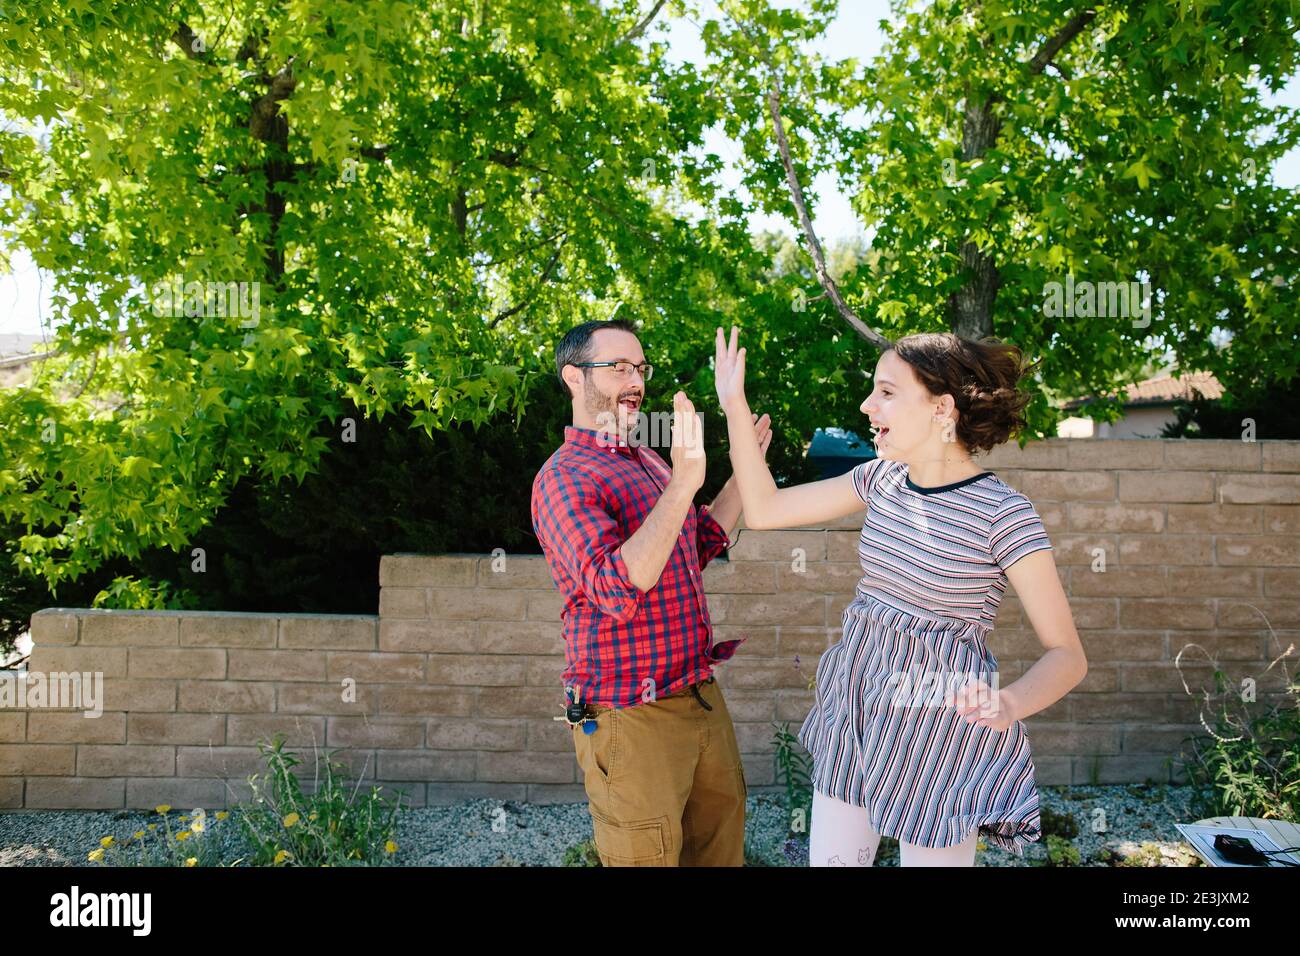 Teen Girl Jumps To Give Her Dad A High Five Stock Photo